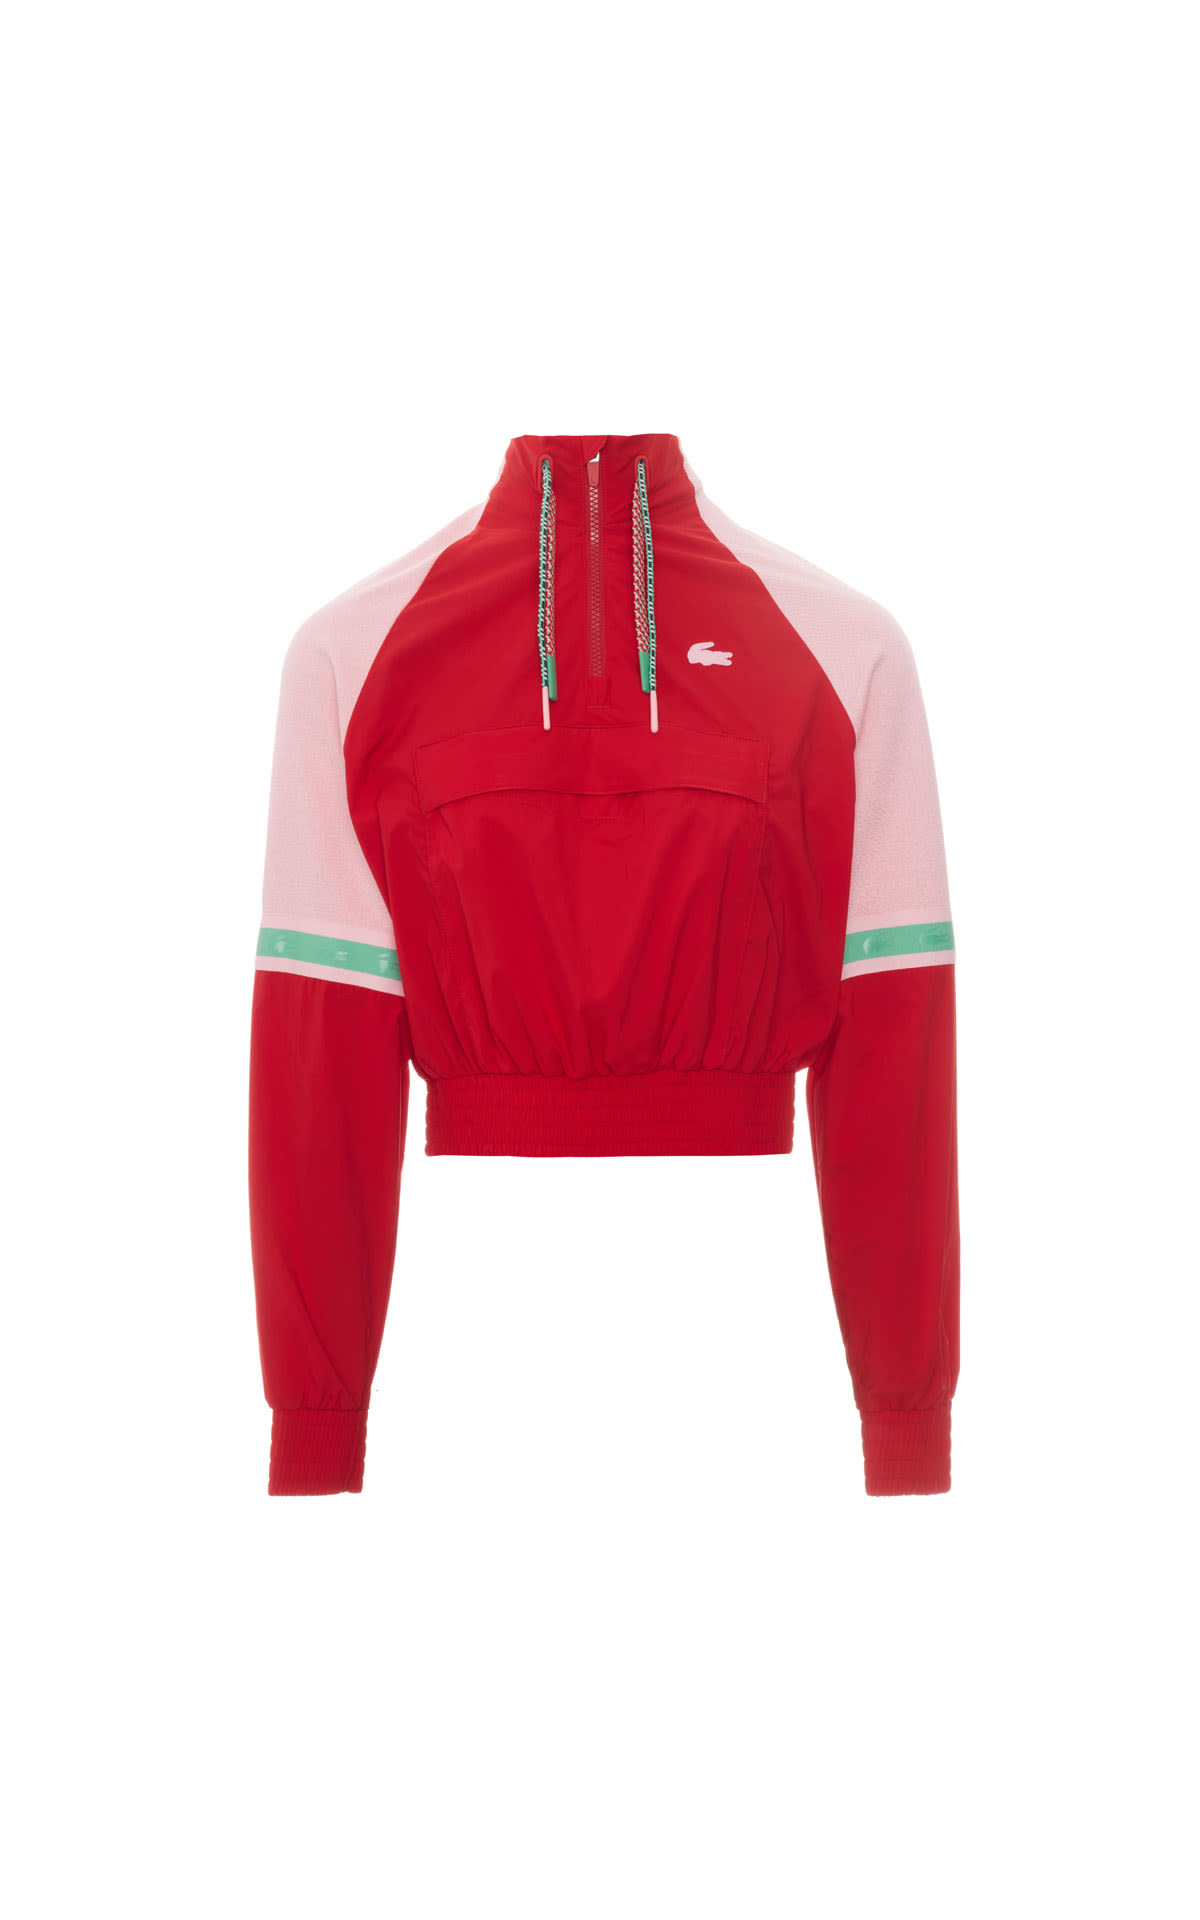 Lacoste Quarter zip sweater from Bicester Village